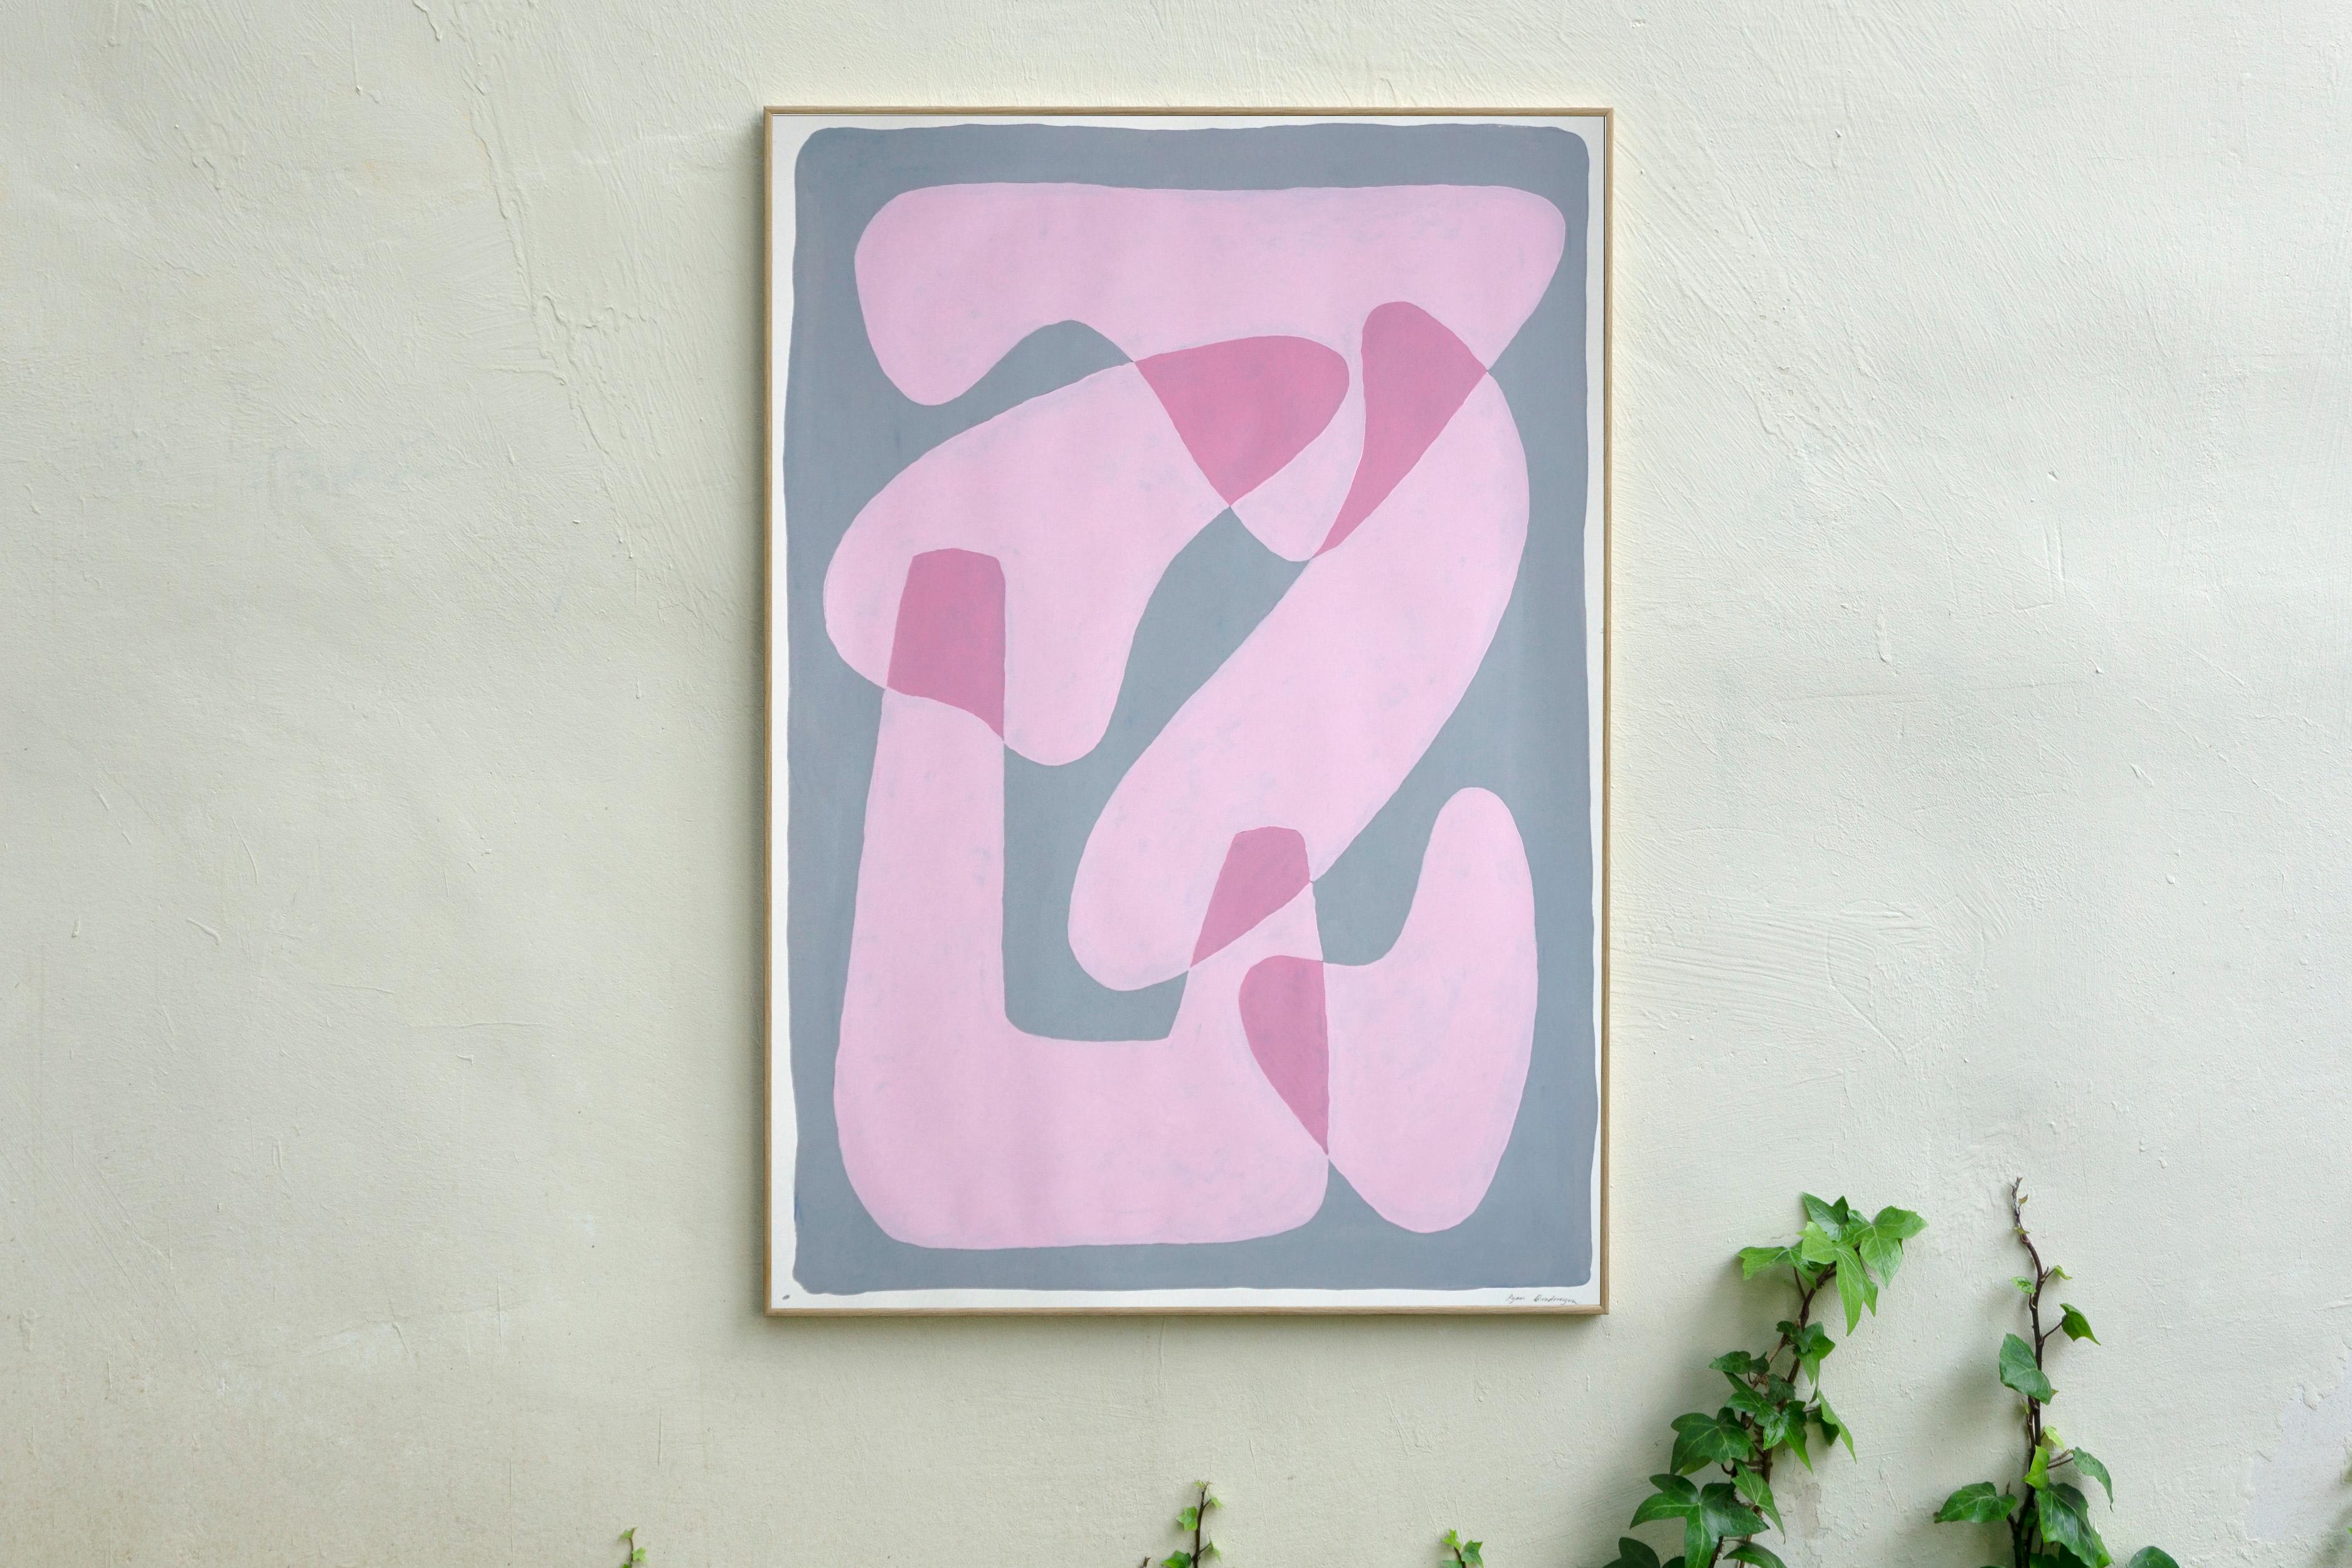 Pastel Pink Figures, Abstract Body Shapes on Gray, Avant-Garde Style on Paper - Abstract Geometric Painting by Ryan Rivadeneyra